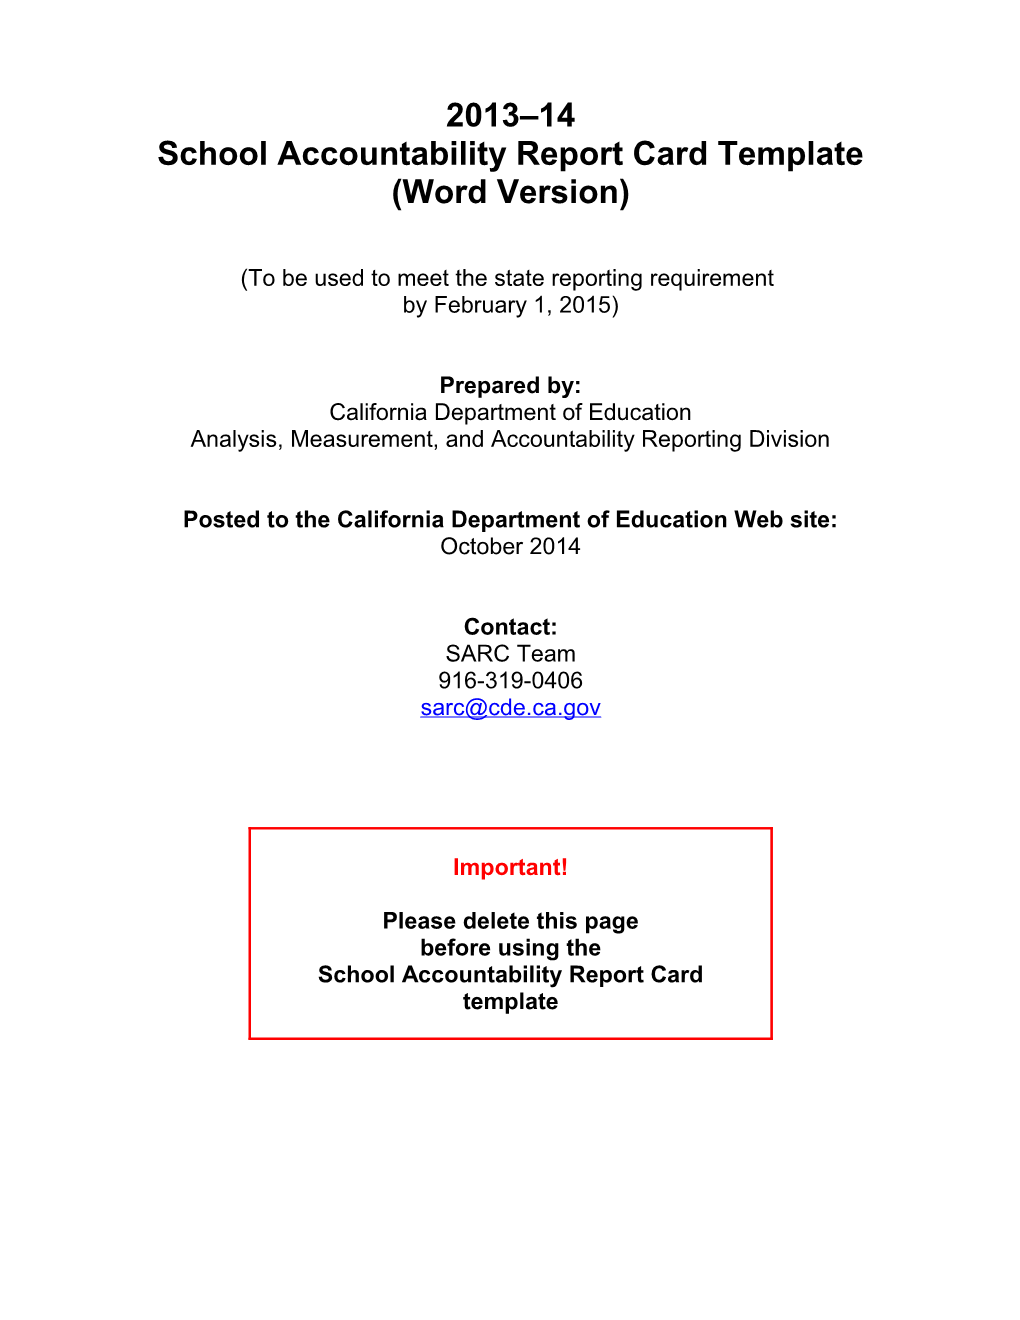 2013-14 SARC Template in Word - School Accountability Report Card (CA Dept of Education) s1